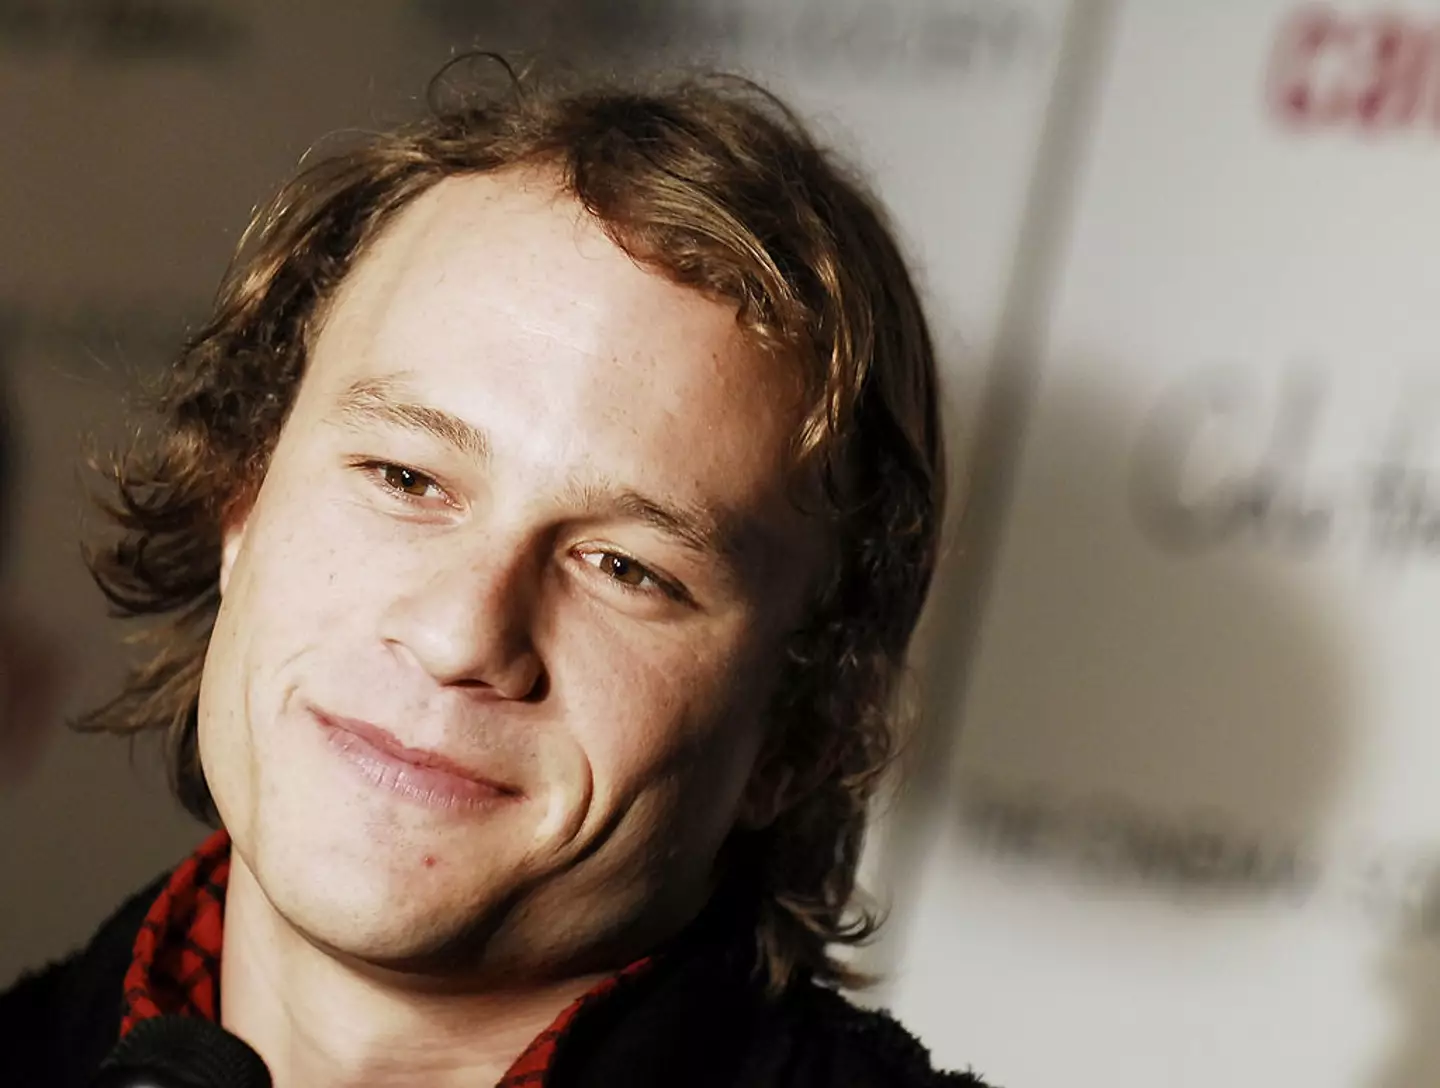 Heath Ledger sadly died at the age of 28 in 2008.